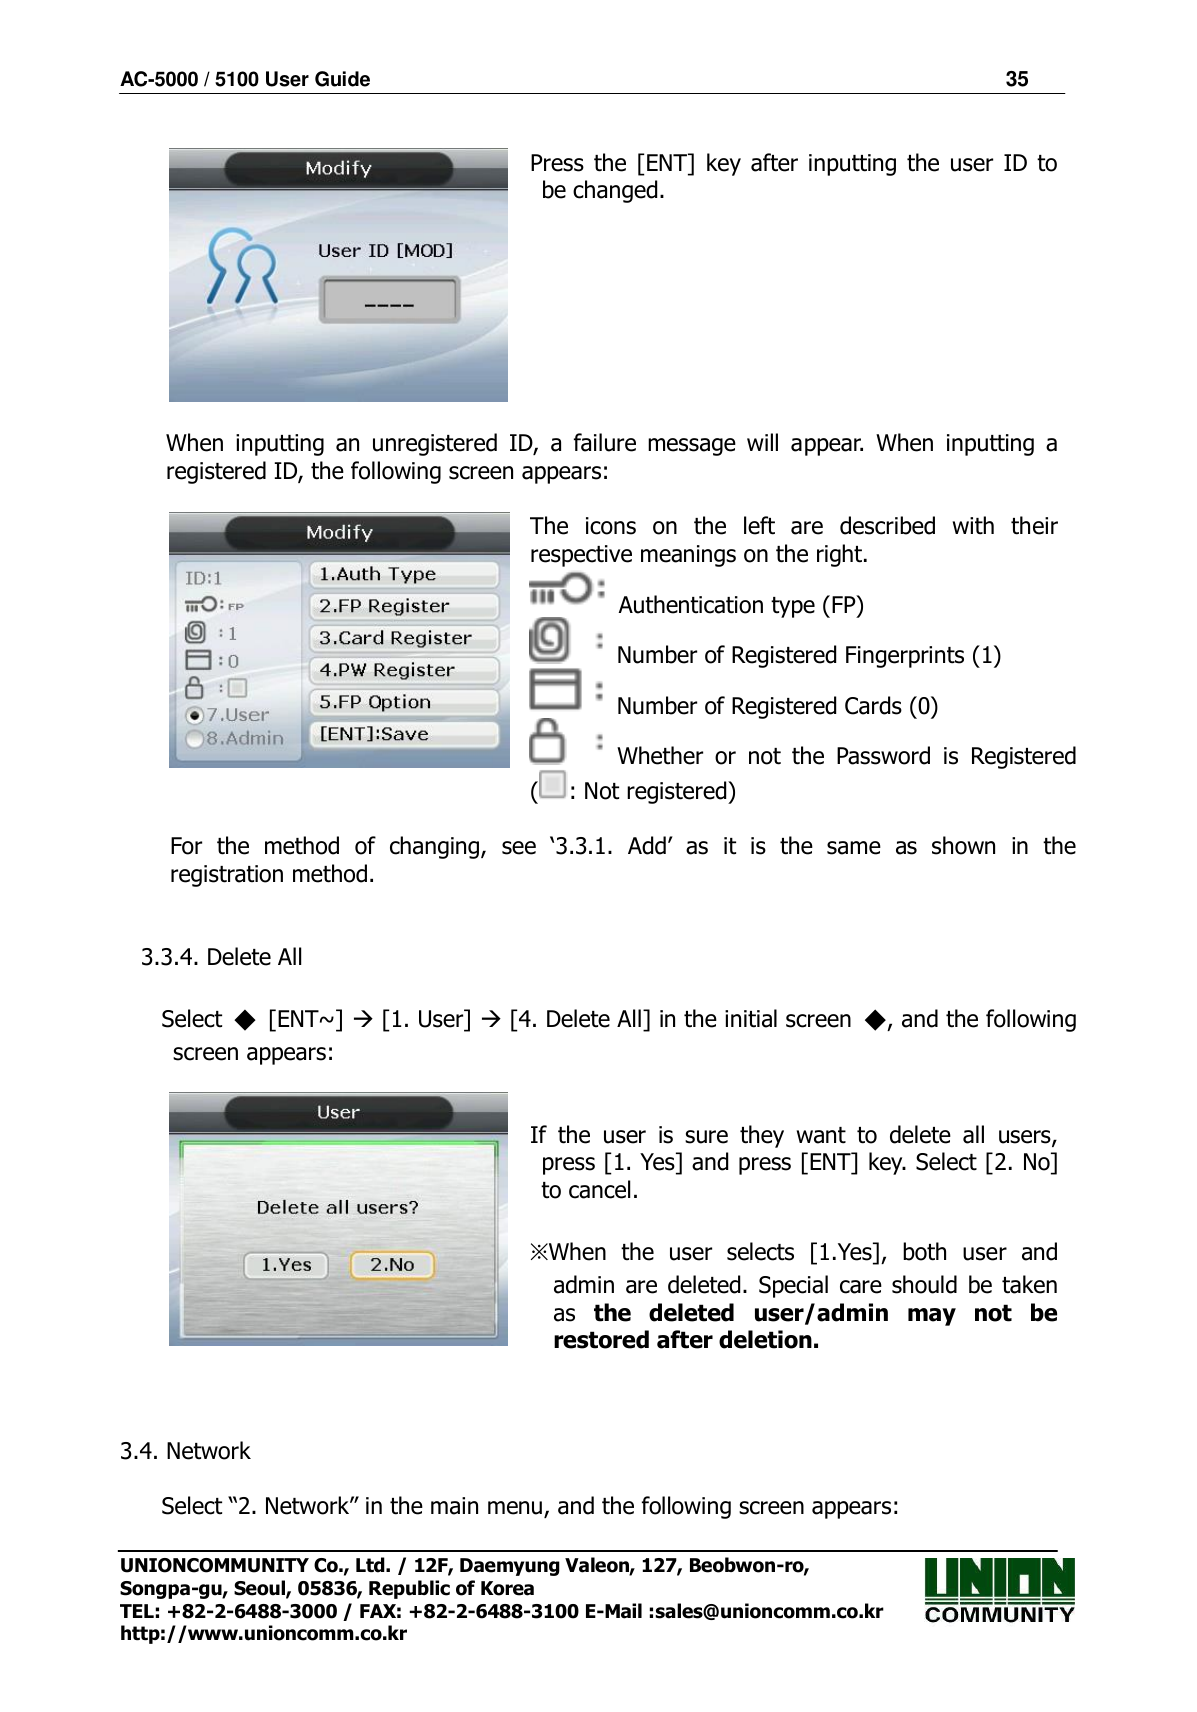 AC-5000 / 5100 User Guide                                                                35  UNIONCOMMUNITY Co., Ltd. / 12F, Daemyung Valeon, 127, Beobwon-ro, Songpa-gu, Seoul, 05836, Republic of Korea TEL: +82-2-6488-3000 / FAX: +82-2-6488-3100 E-Mail :sales@unioncomm.co.kr http://www.unioncomm.co.kr   Press  the [ENT] key  after inputting  the  user  ID  to be changed.     When  inputting  an  unregistered  ID,  a  failure  message  will  appear.  When  inputting  a registered ID, the following screen appears:   The  icons  on  the  left  are  described  with  their respective meanings on the right.   Authentication type (FP)   Number of Registered Fingerprints (1)   Number of Registered Cards (0)   Whether  or  not  the  Password  is  Registered ( : Not registered)  For  the  method  of  changing,  see  ‘3.3.1.  Add’  as  it  is  the  same  as  shown  in  the registration method.   3.3.4. Delete All  Select  ◆  [ENT~]  [1. User]  [4. Delete All] in the initial screen  ◆, and the following screen appears:    If  the  user  is  sure  they  want  to  delete  all  users, press [1. Yes] and press [ENT] key. Select [2. No] to cancel.  ※When  the  user  selects  [1.Yes],  both  user  and admin  are  deleted. Special  care should be taken as  the  deleted  user/admin  may  not  be restored after deletion.    3.4. Network  Select “2. Network” in the main menu, and the following screen appears: 